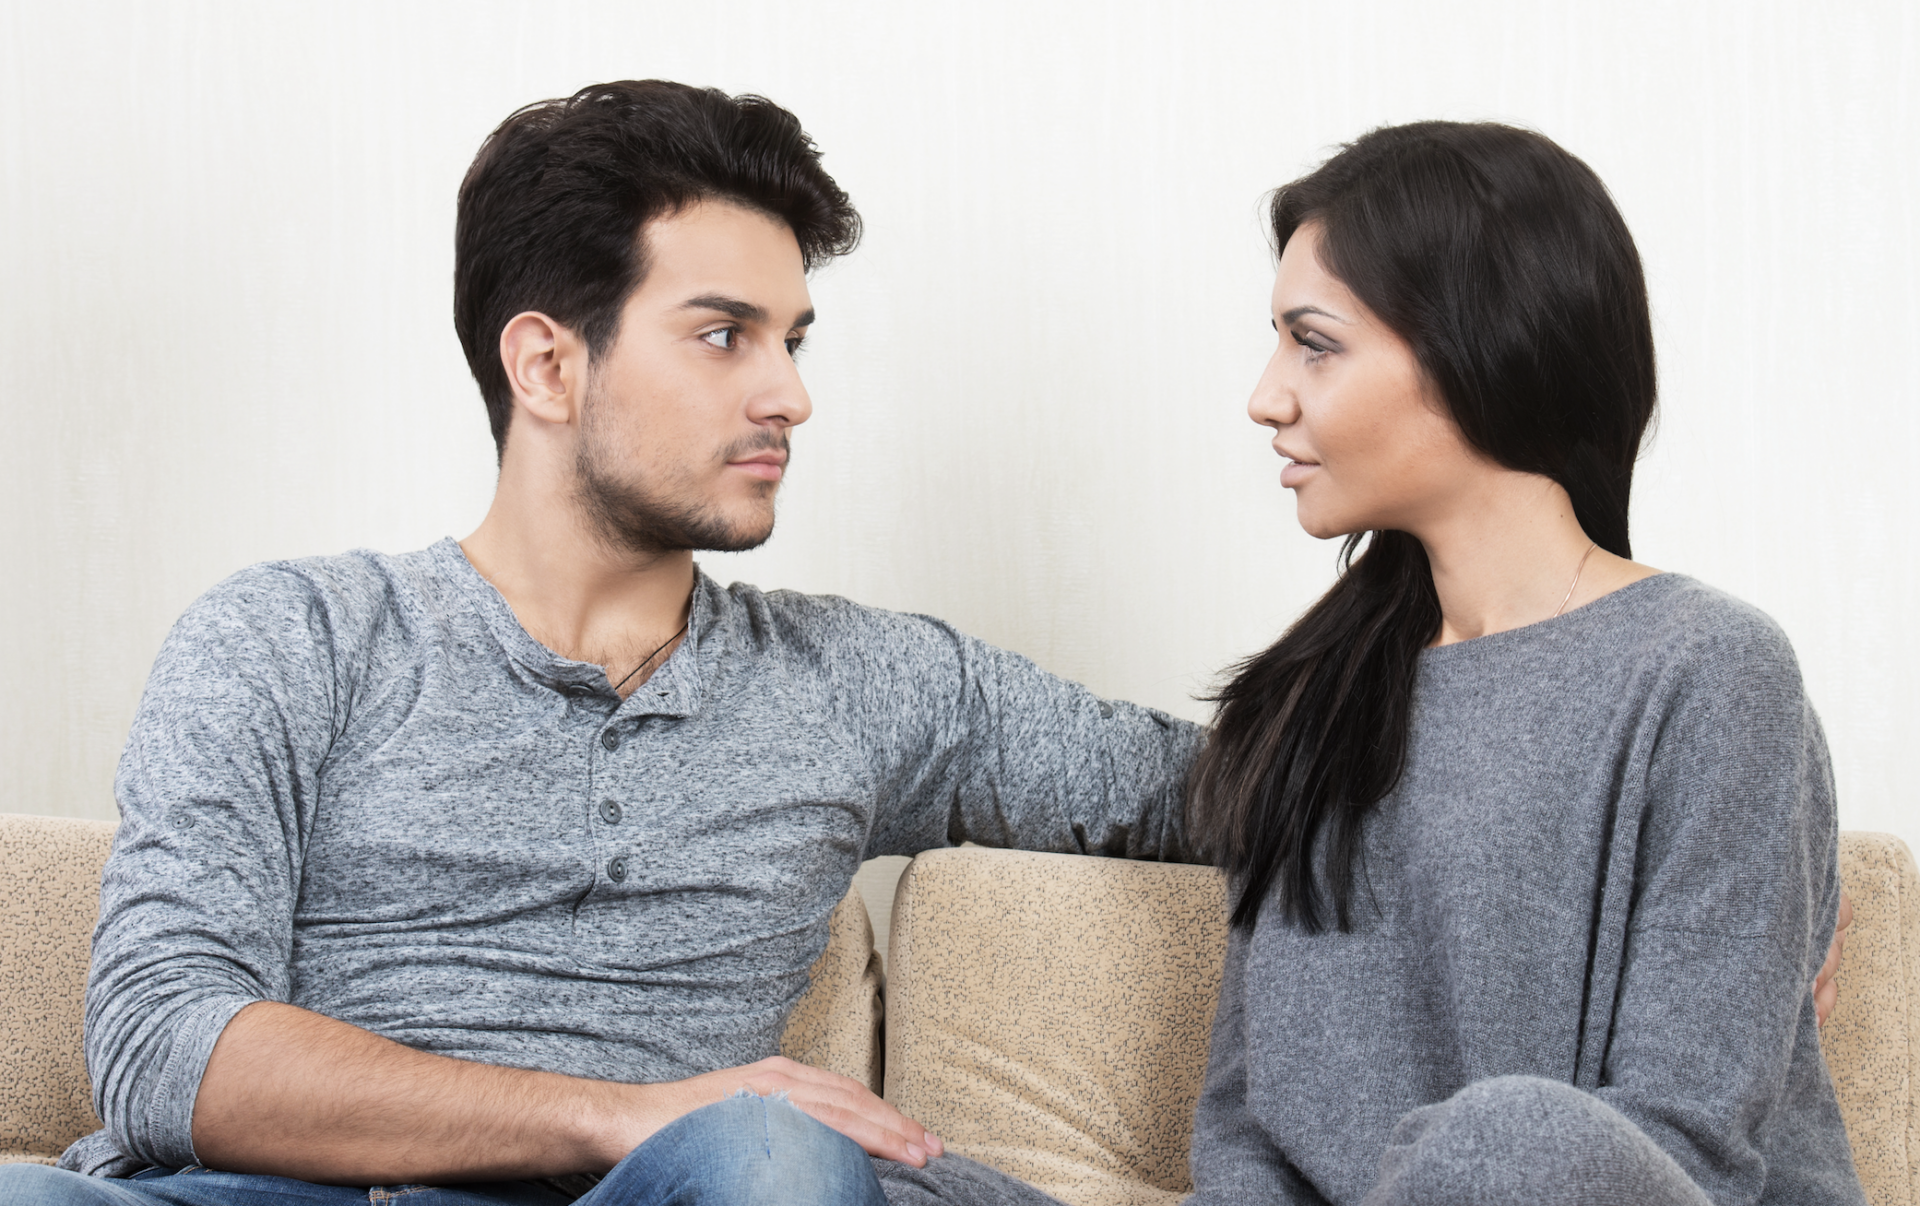 How To Ask Your Partner For an Open Relationship